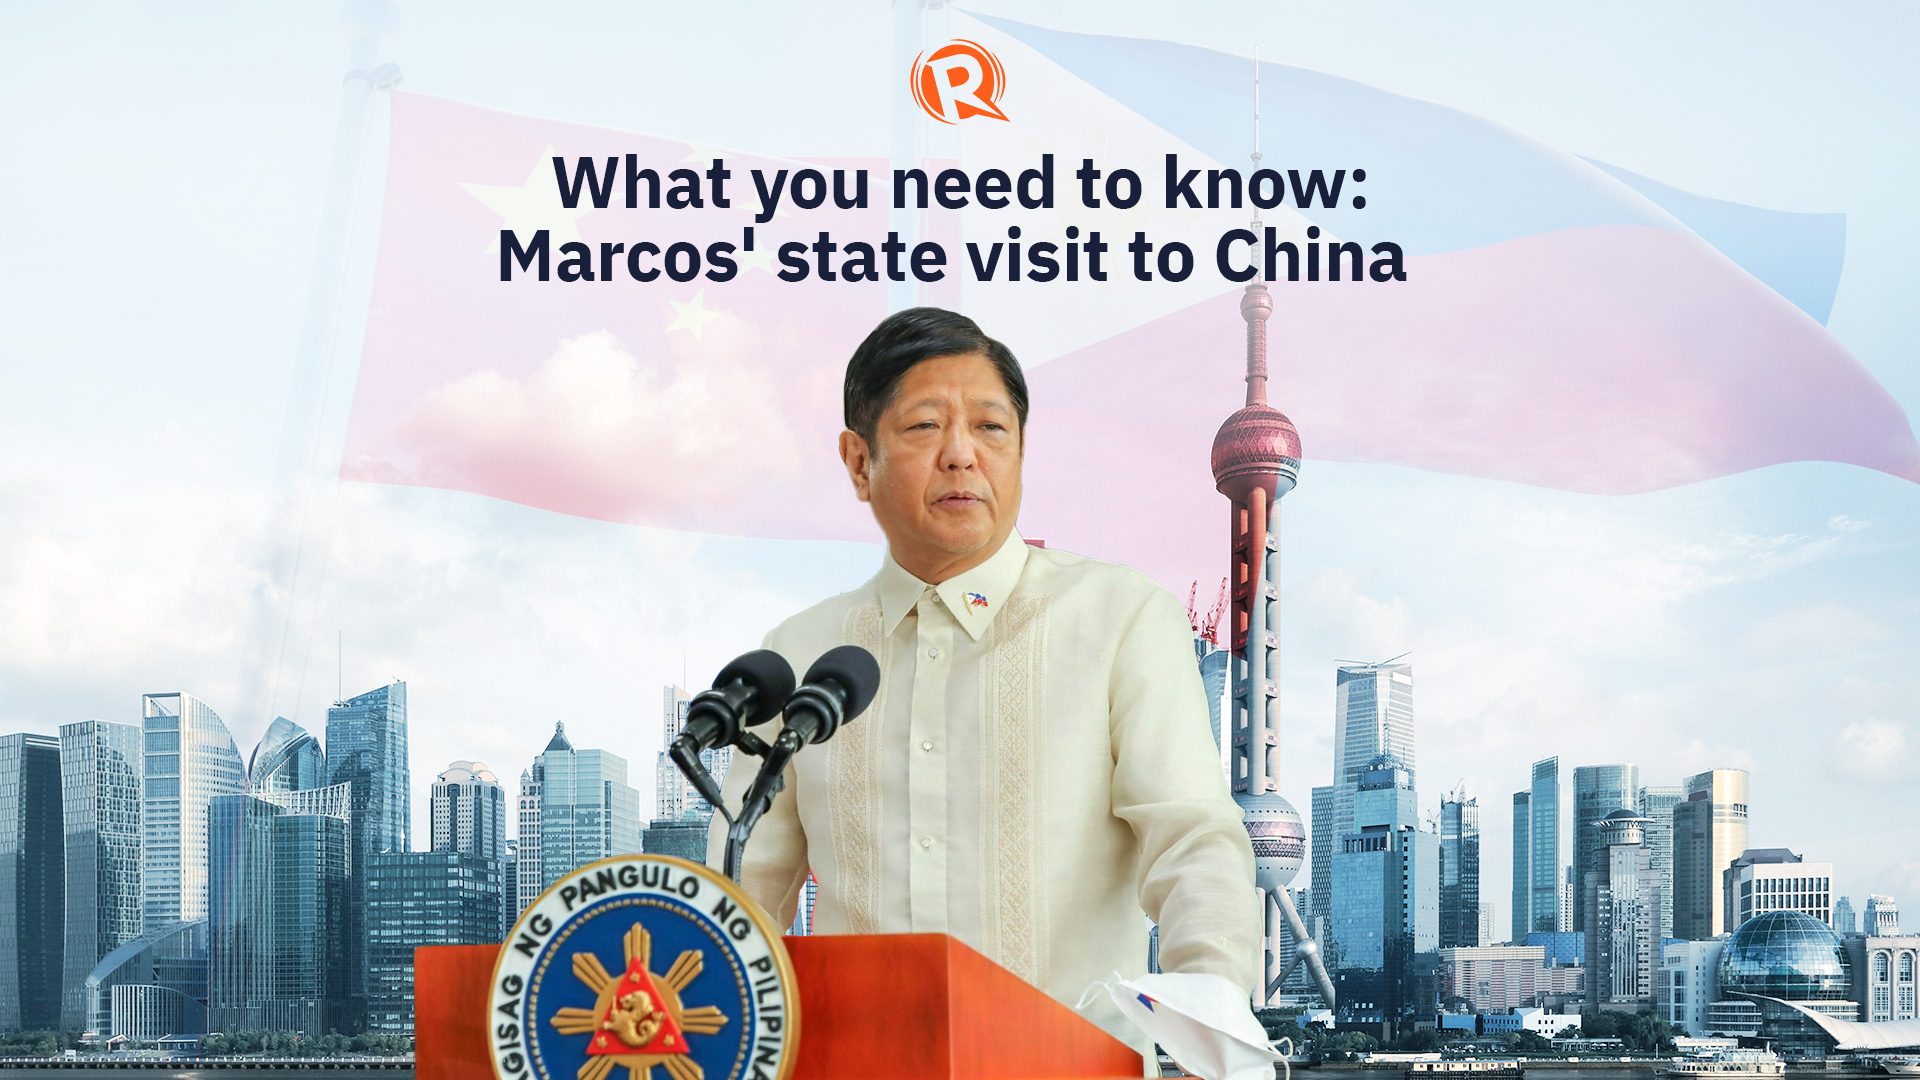 What you need to know about Marcos’ state visit to China